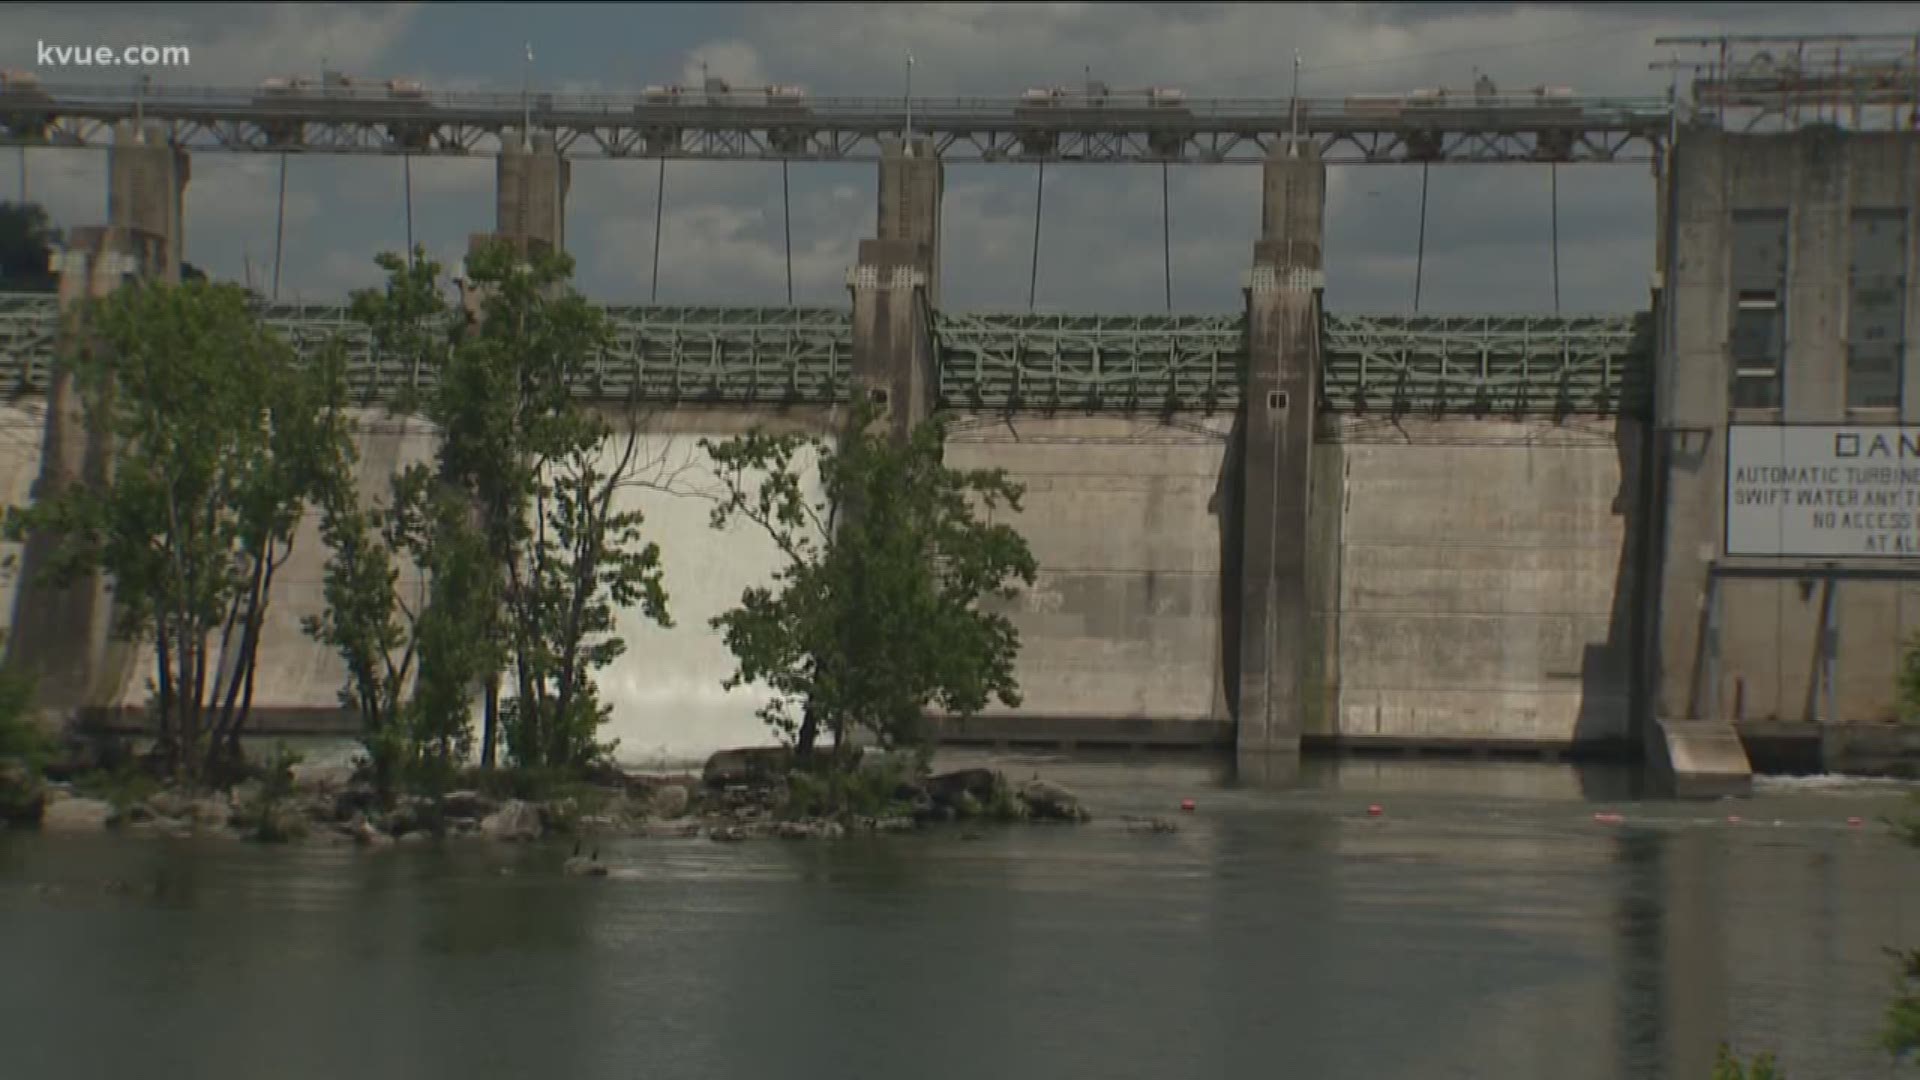 A floodgate at Tom Miller Dam is now partially open after a wet few days in Central Texas.